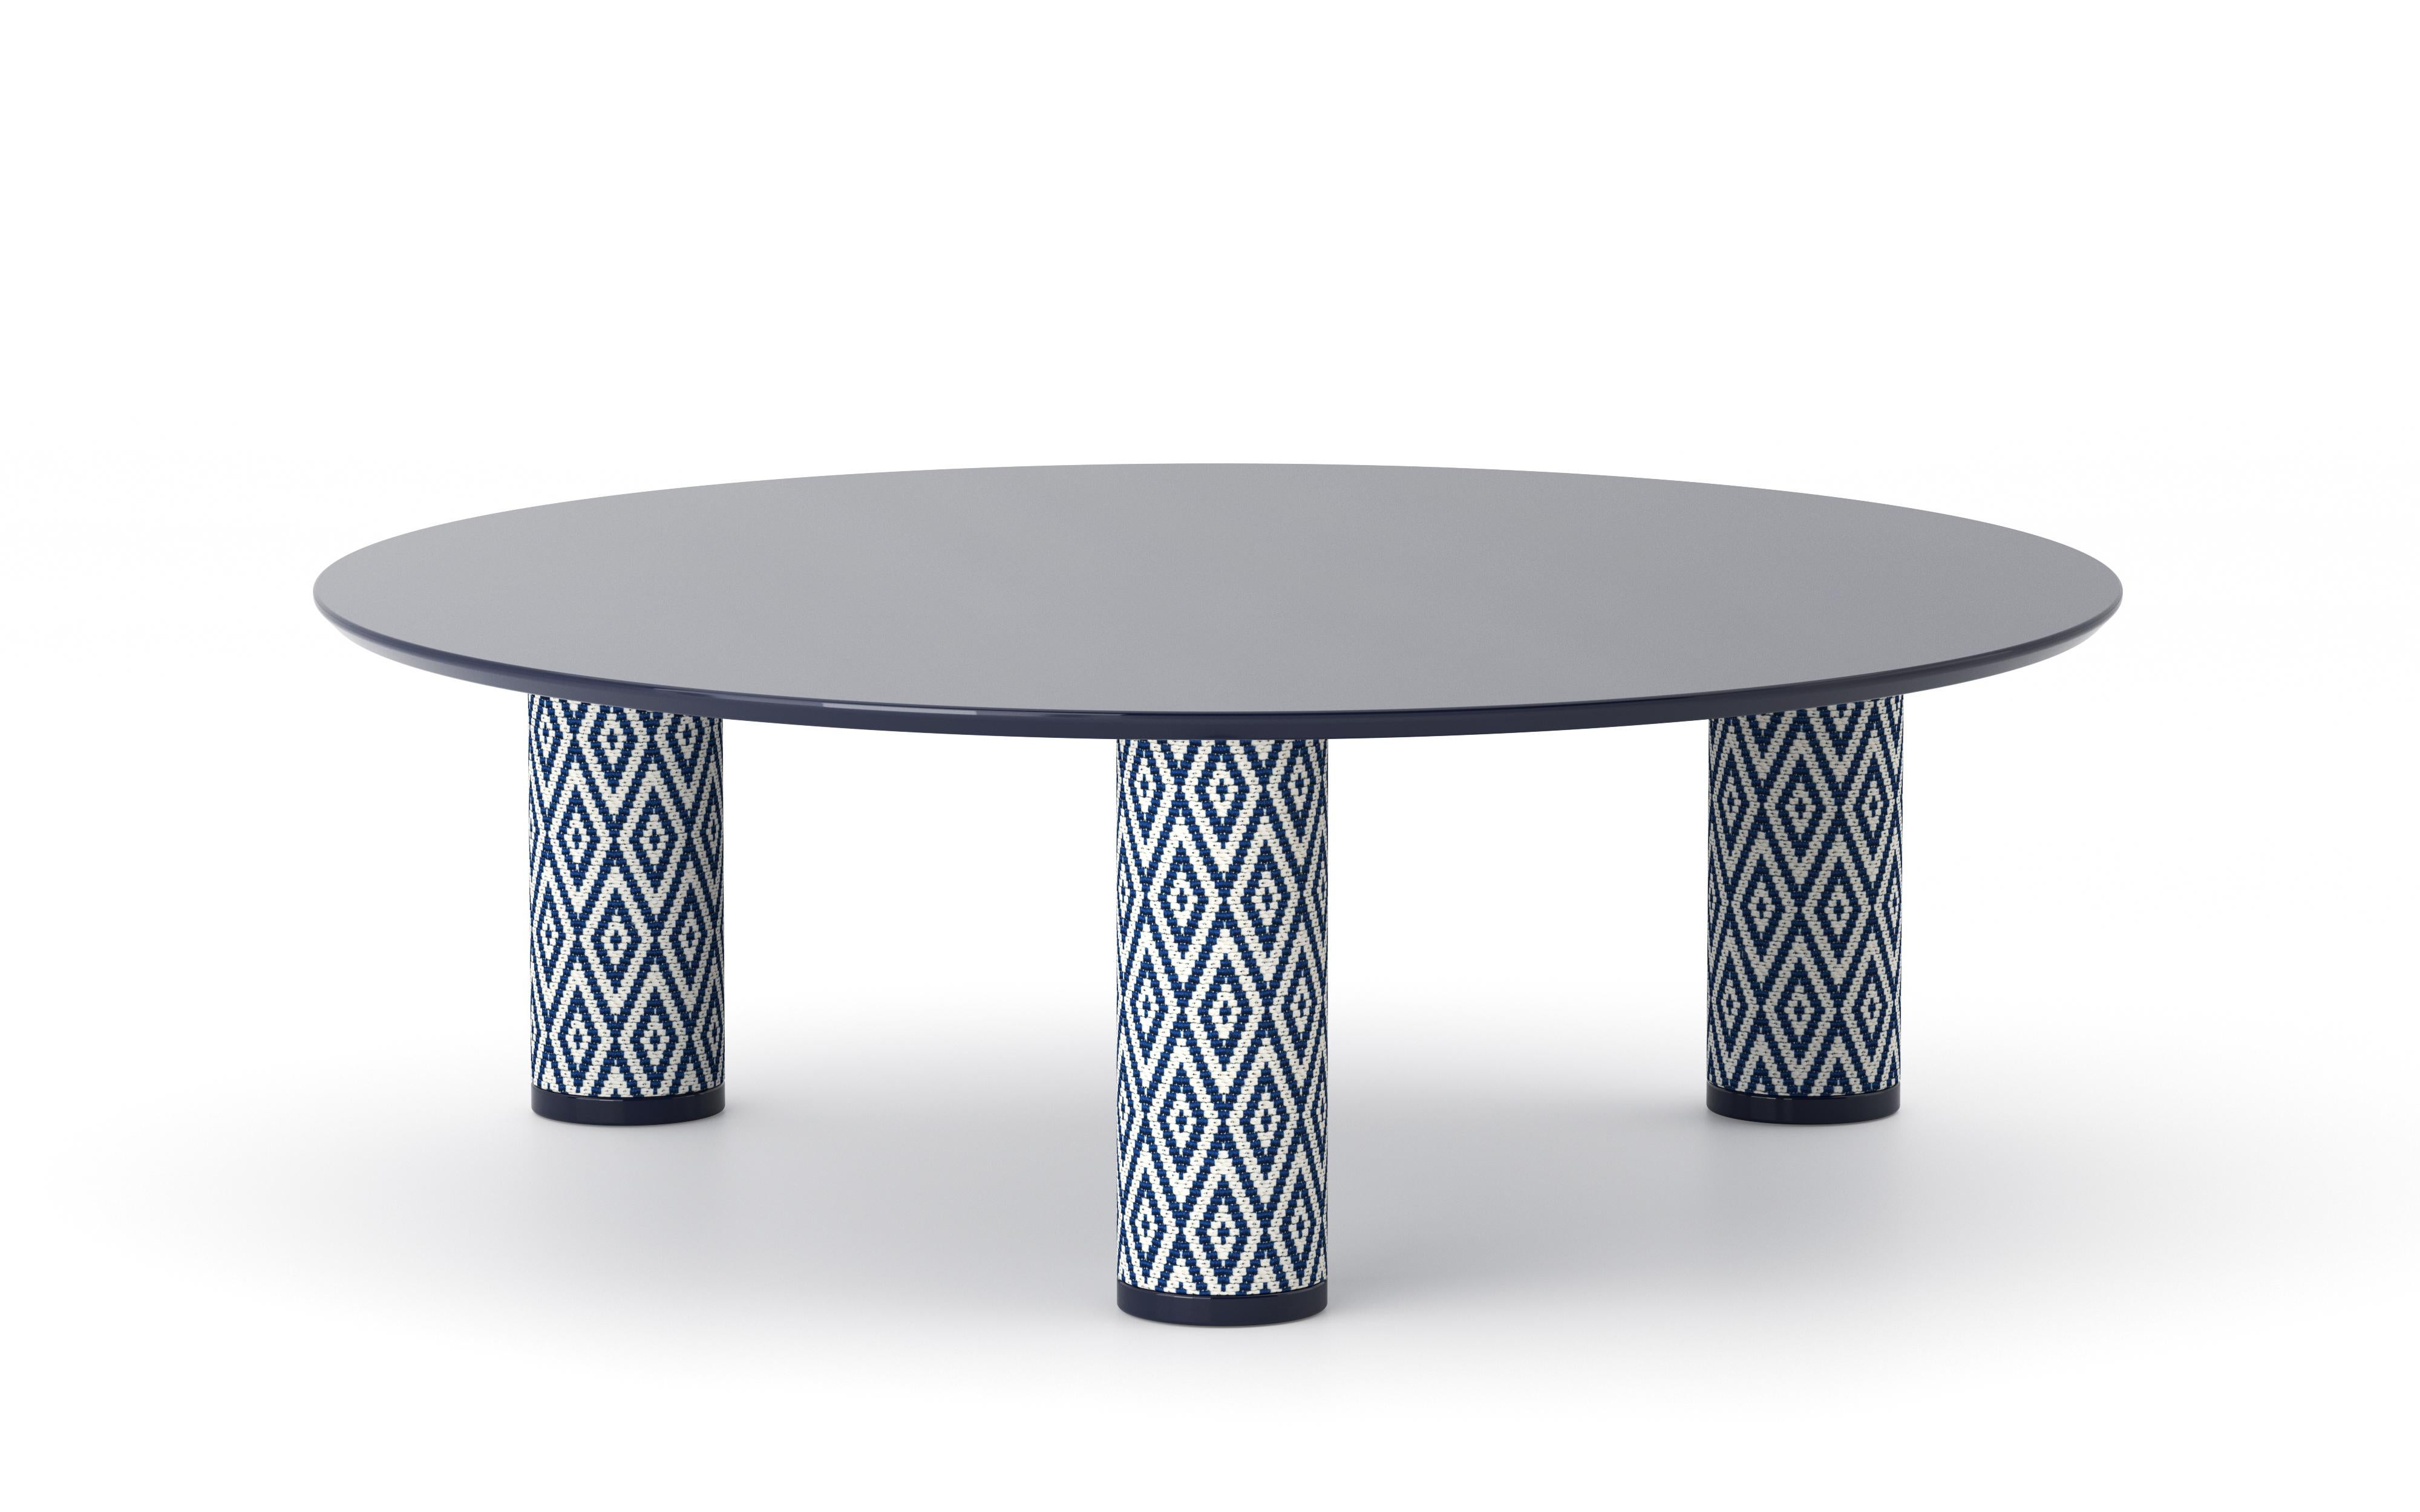 UMA Round 90 is a low table from the collection of the same name designed by Ludovica+Roberto Palomba for P + C Edizioni in spring 2022.
Featuring a circular resin top, UMA Round 90 puts the design accent on the table’s cylindrical pedestal legs